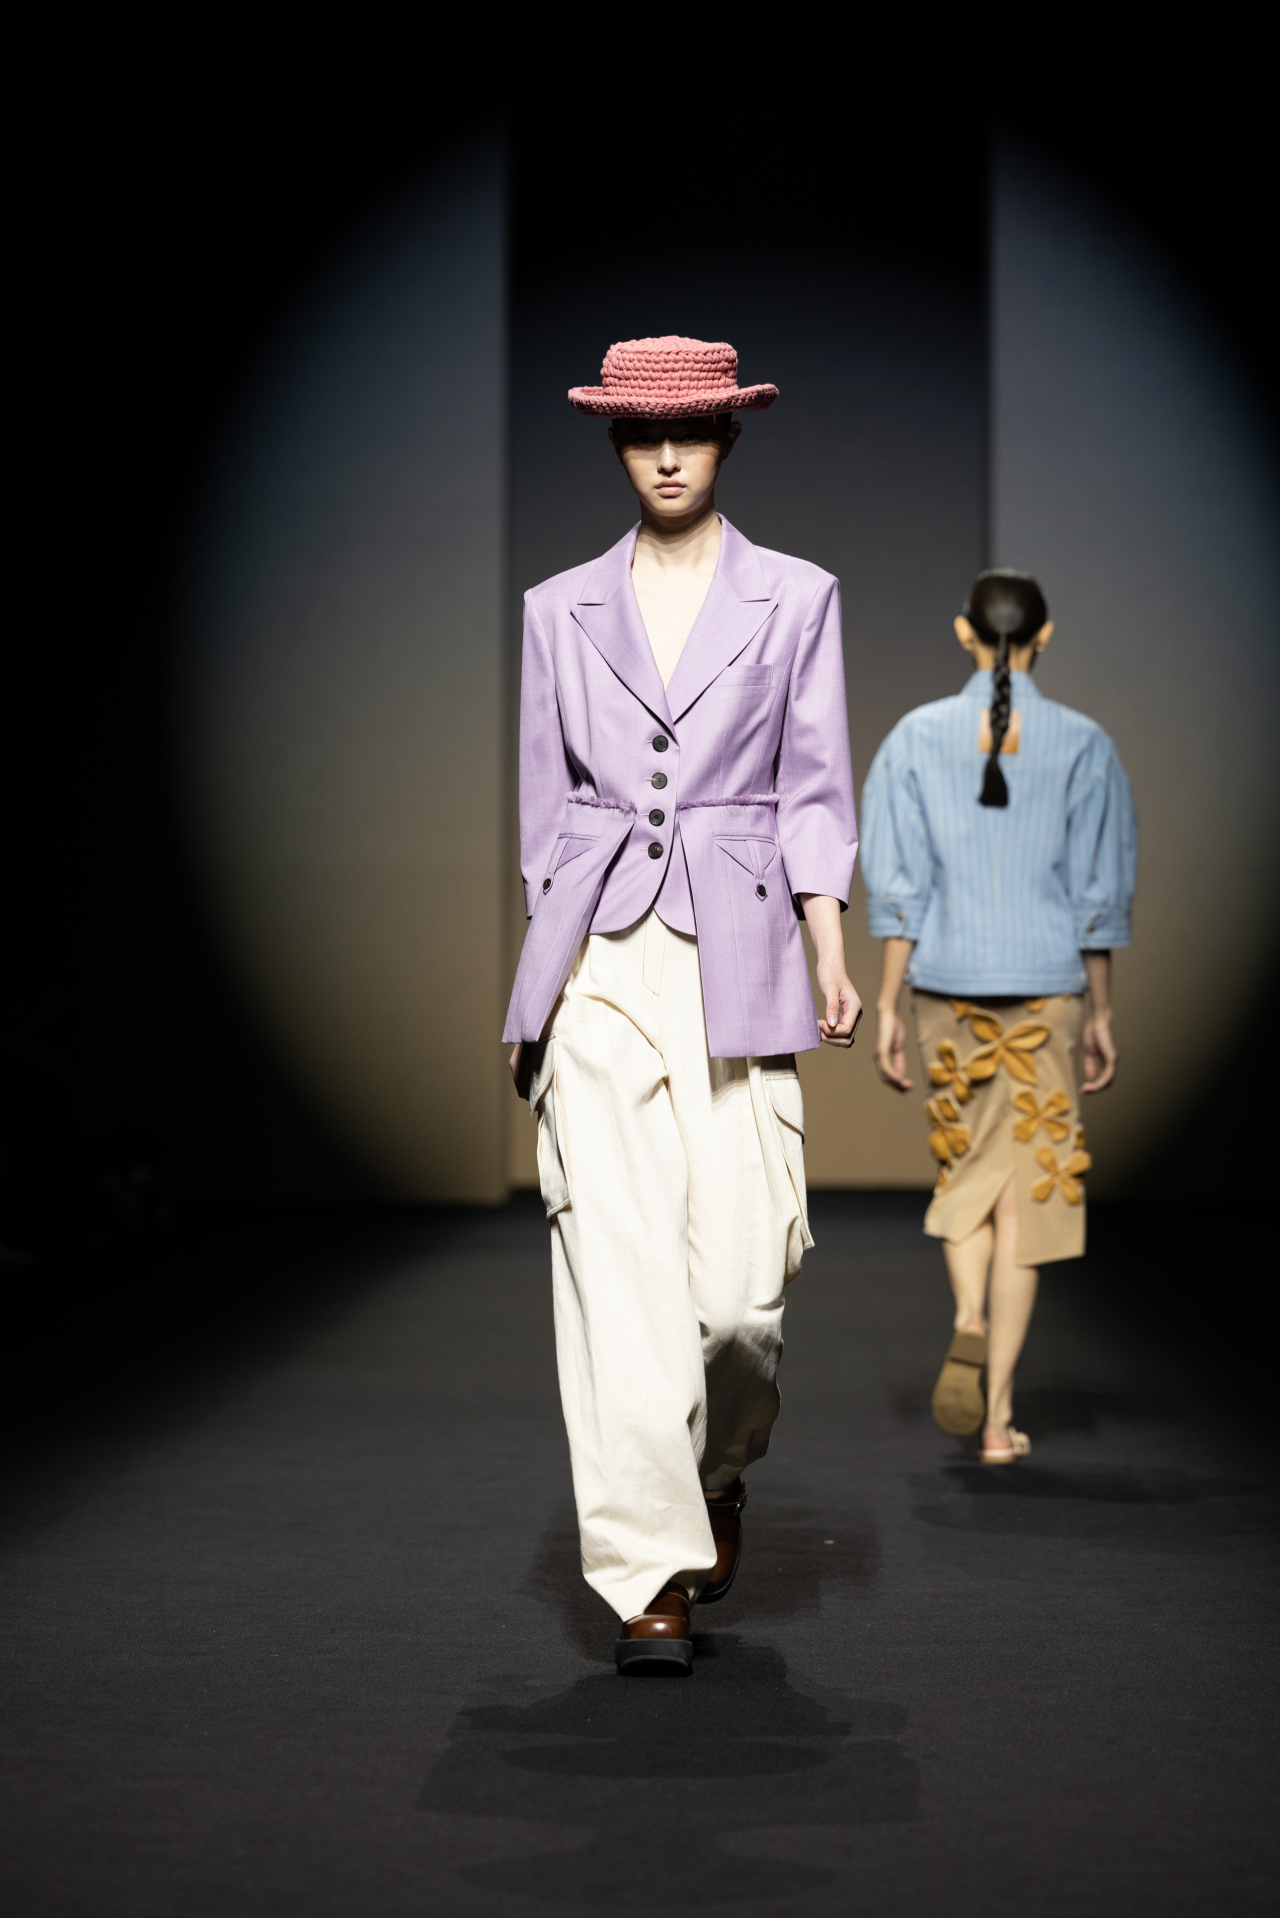 July Column shows its 2023 spring-summer collection at Dongdaemun Design Plaza in Seoul on Wednesday as part of Seoul Fashion Week. (Seoul Fashion Week)